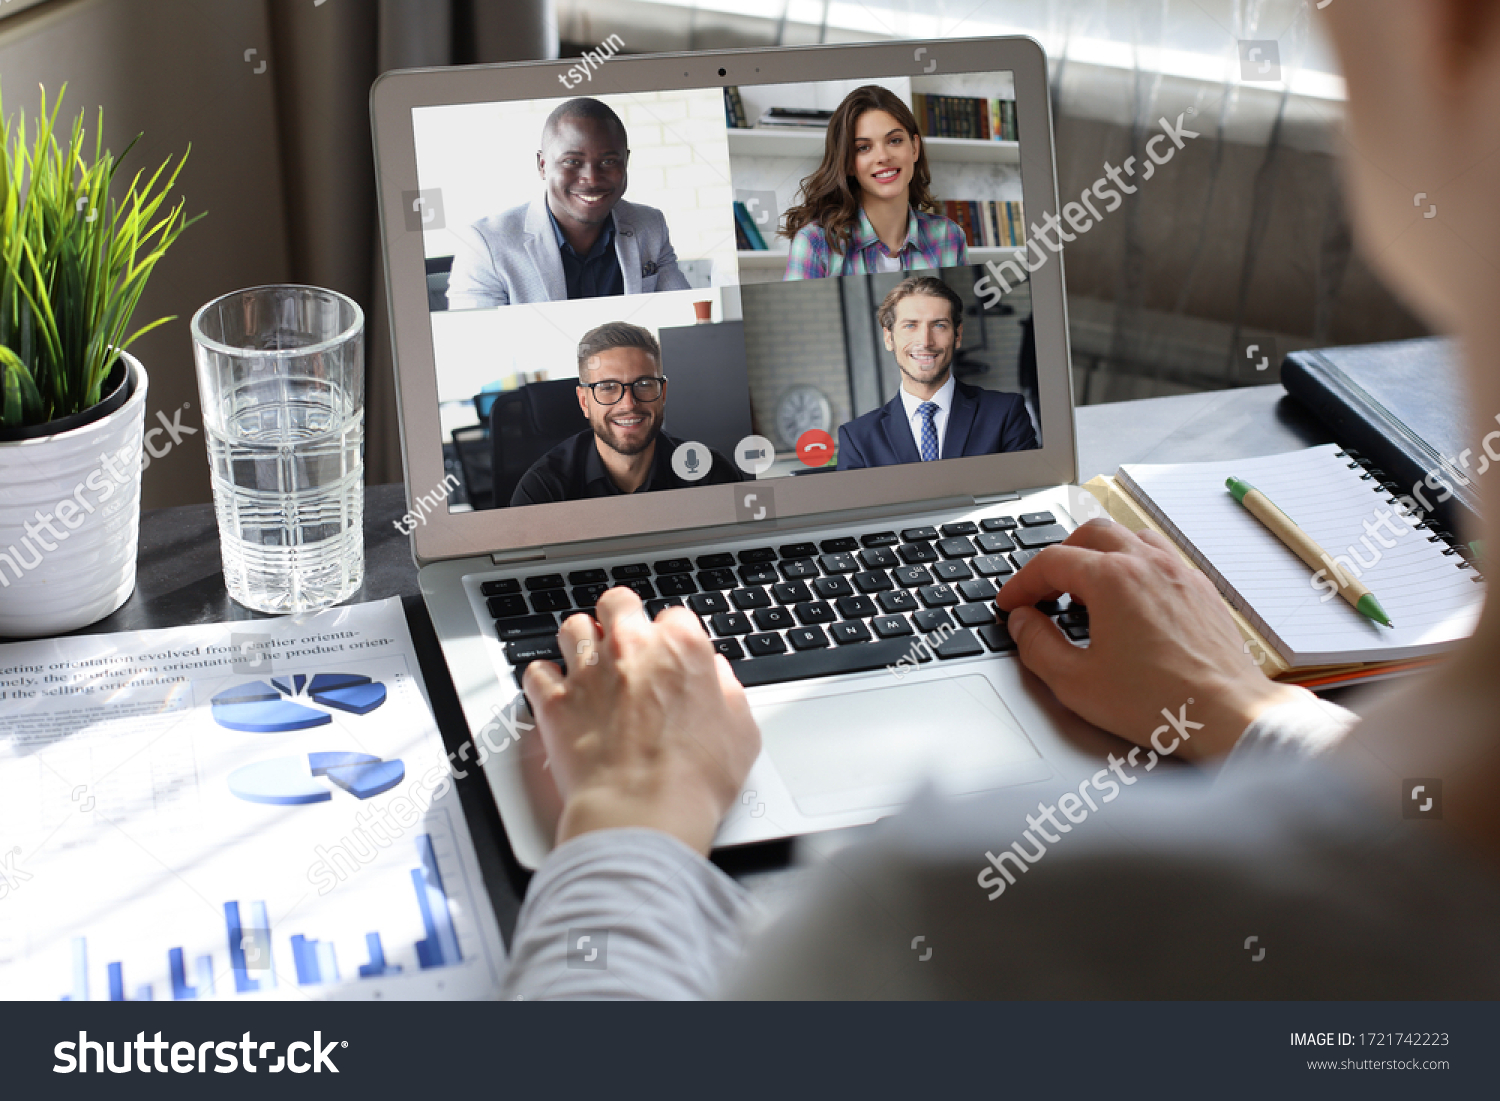 Business woman talking to her colleagues in video conference. Multiethnic business team working from home using laptop. #1721742223